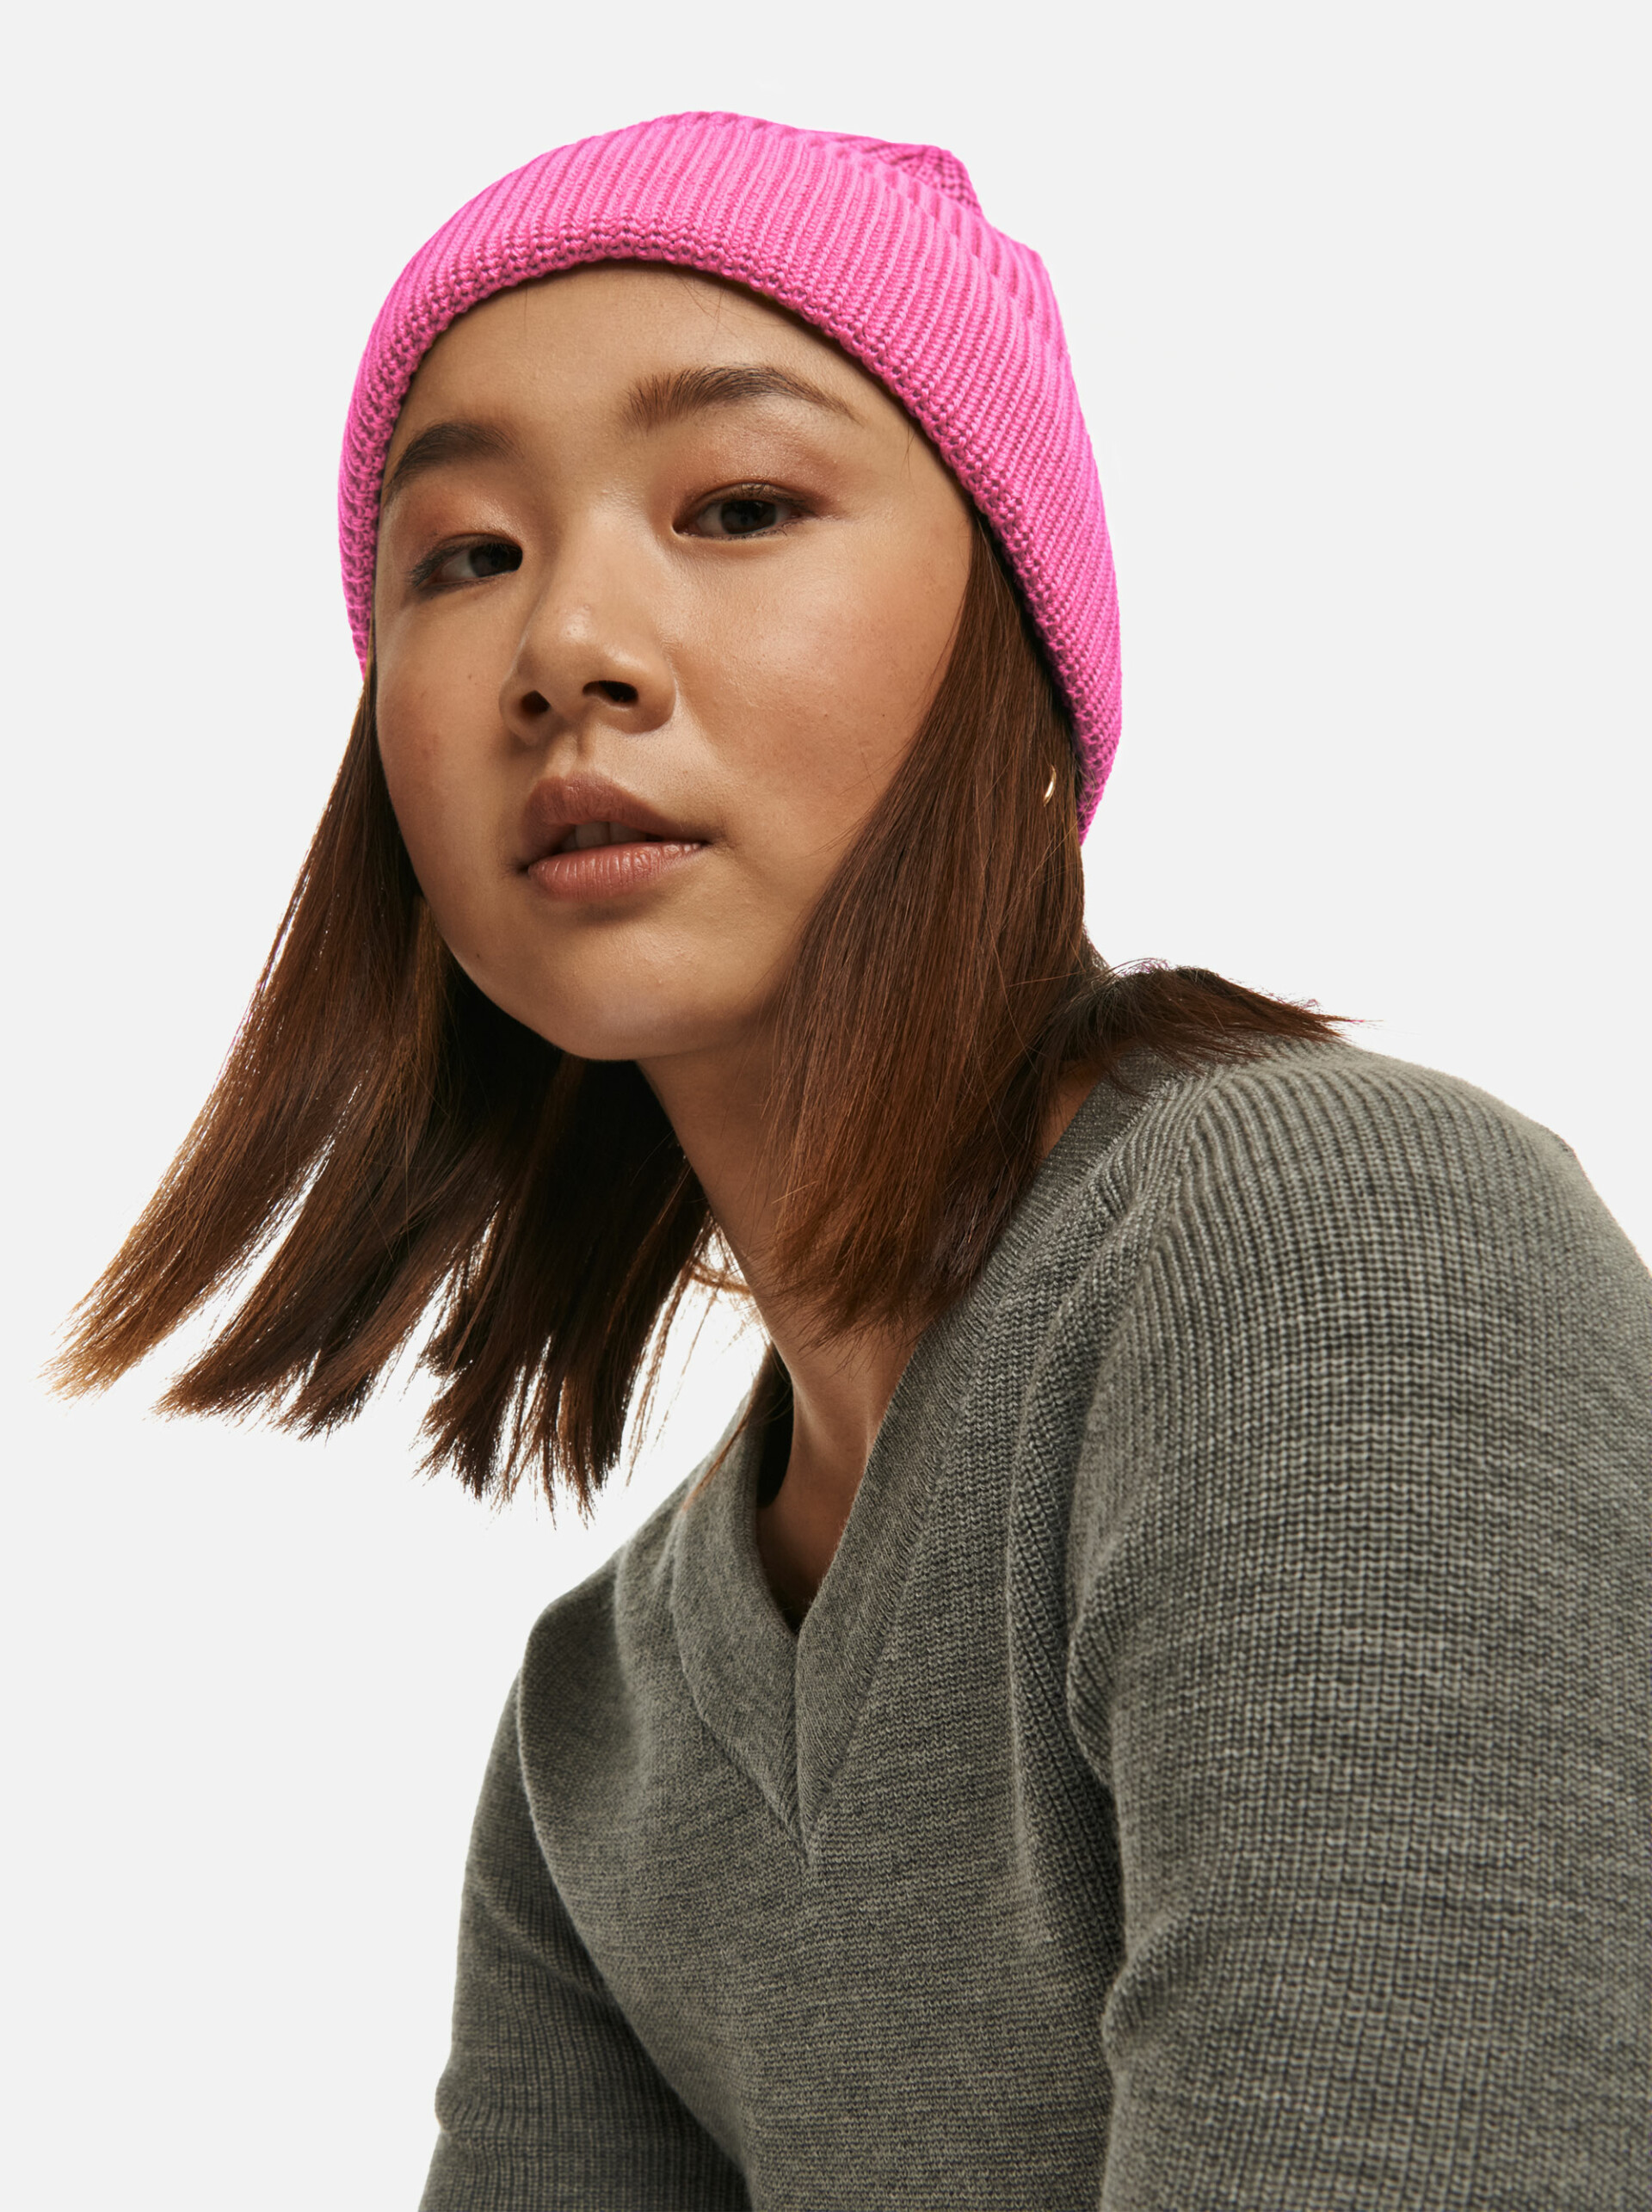 The Crewneck Sweater in Bright Pink · Teym